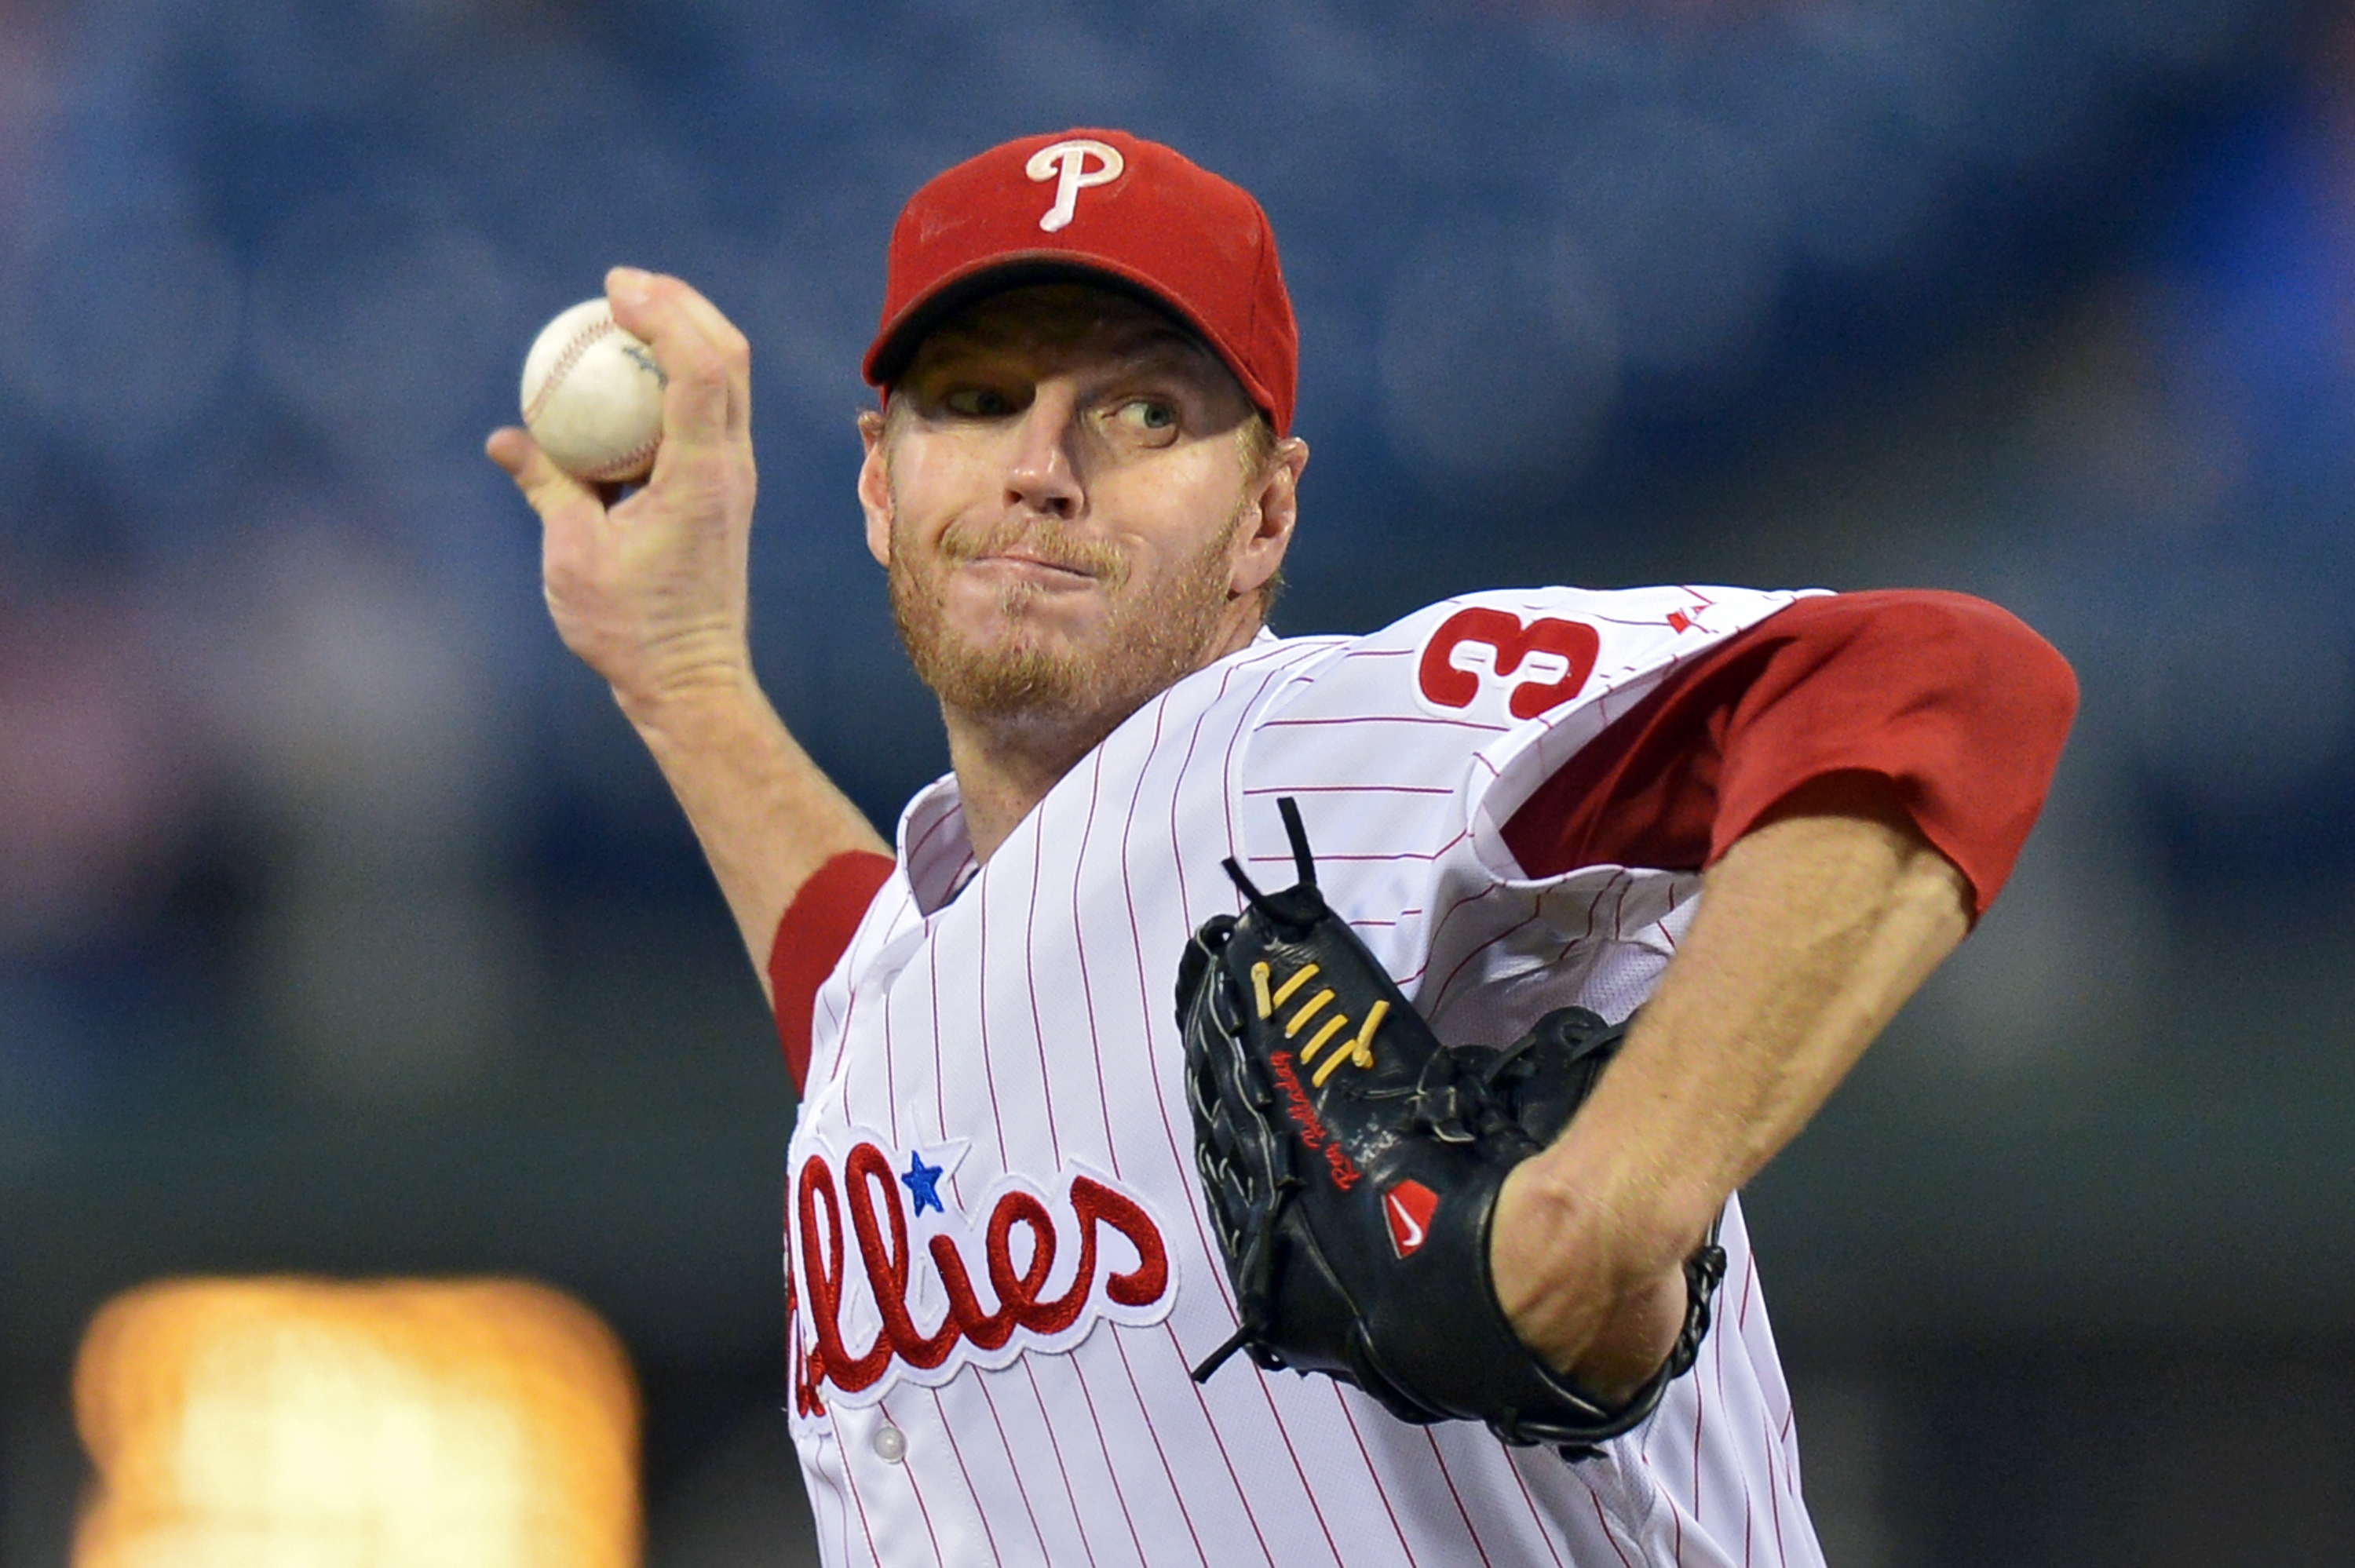 Roy Halladay was a clear Hall of Famer - Beyond the Box Score